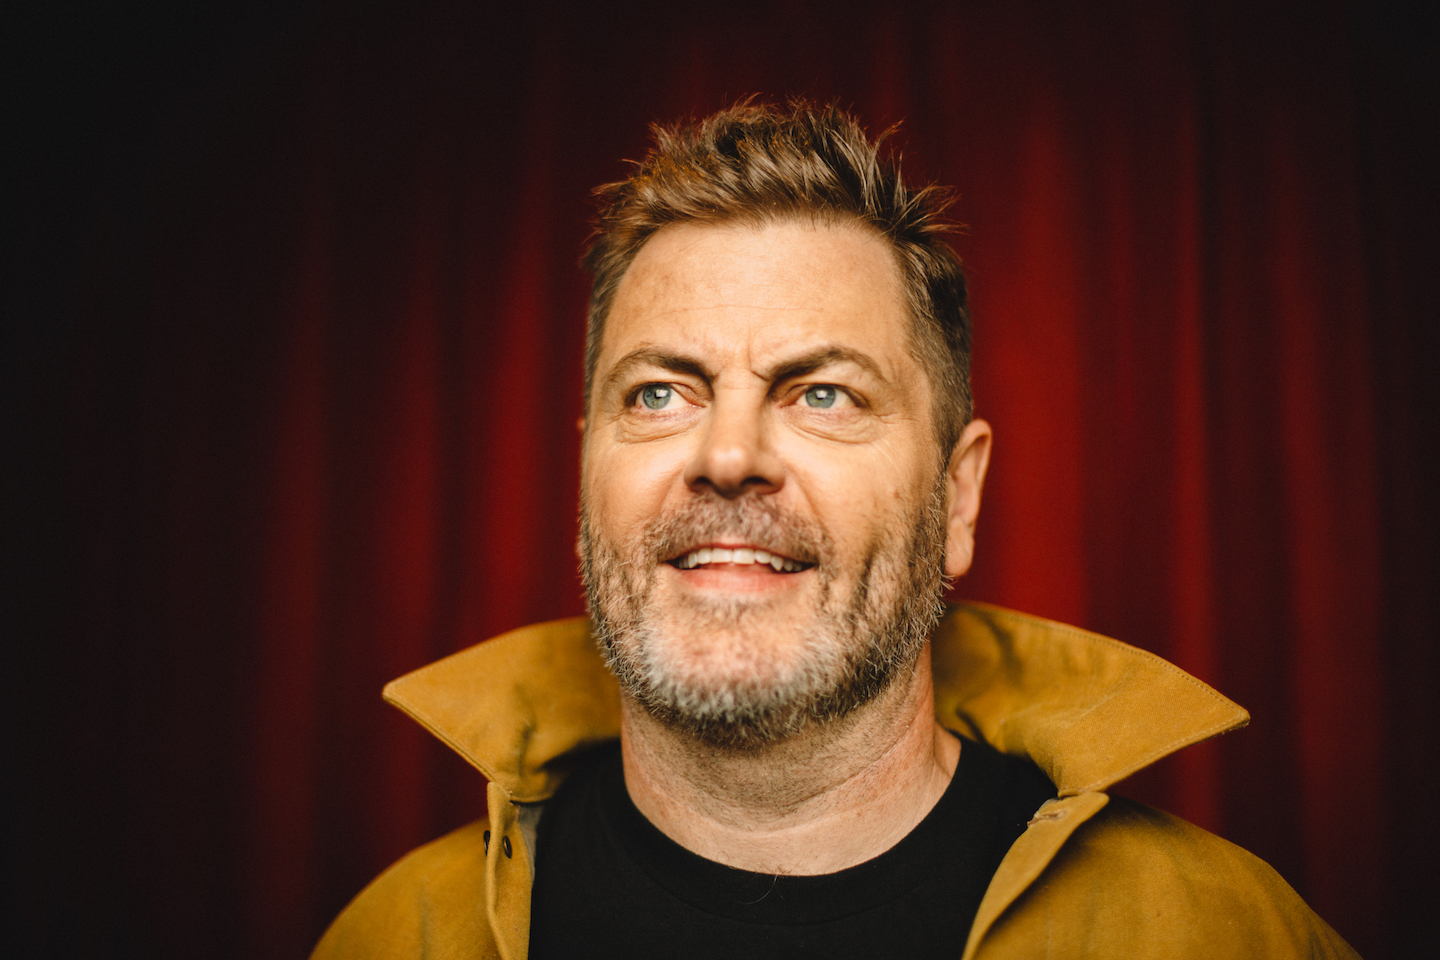 Nick Offerman. Photo by Matt Winkelmeyer/Contour by Getty Images for SXSW